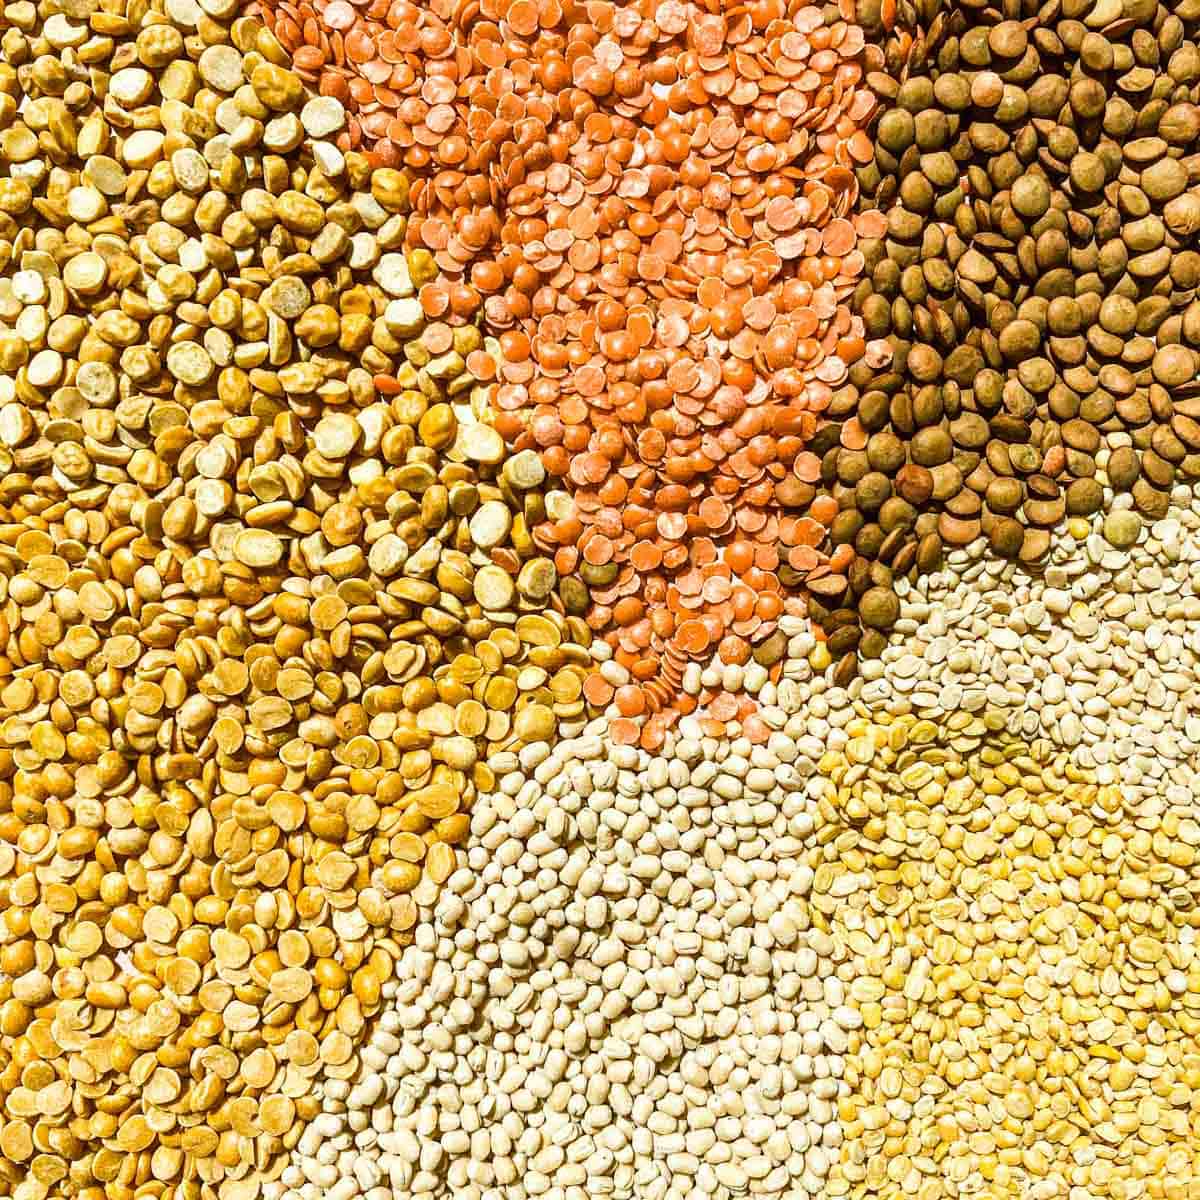 Different dal variations from moong, masoor, toor, and urad dal.